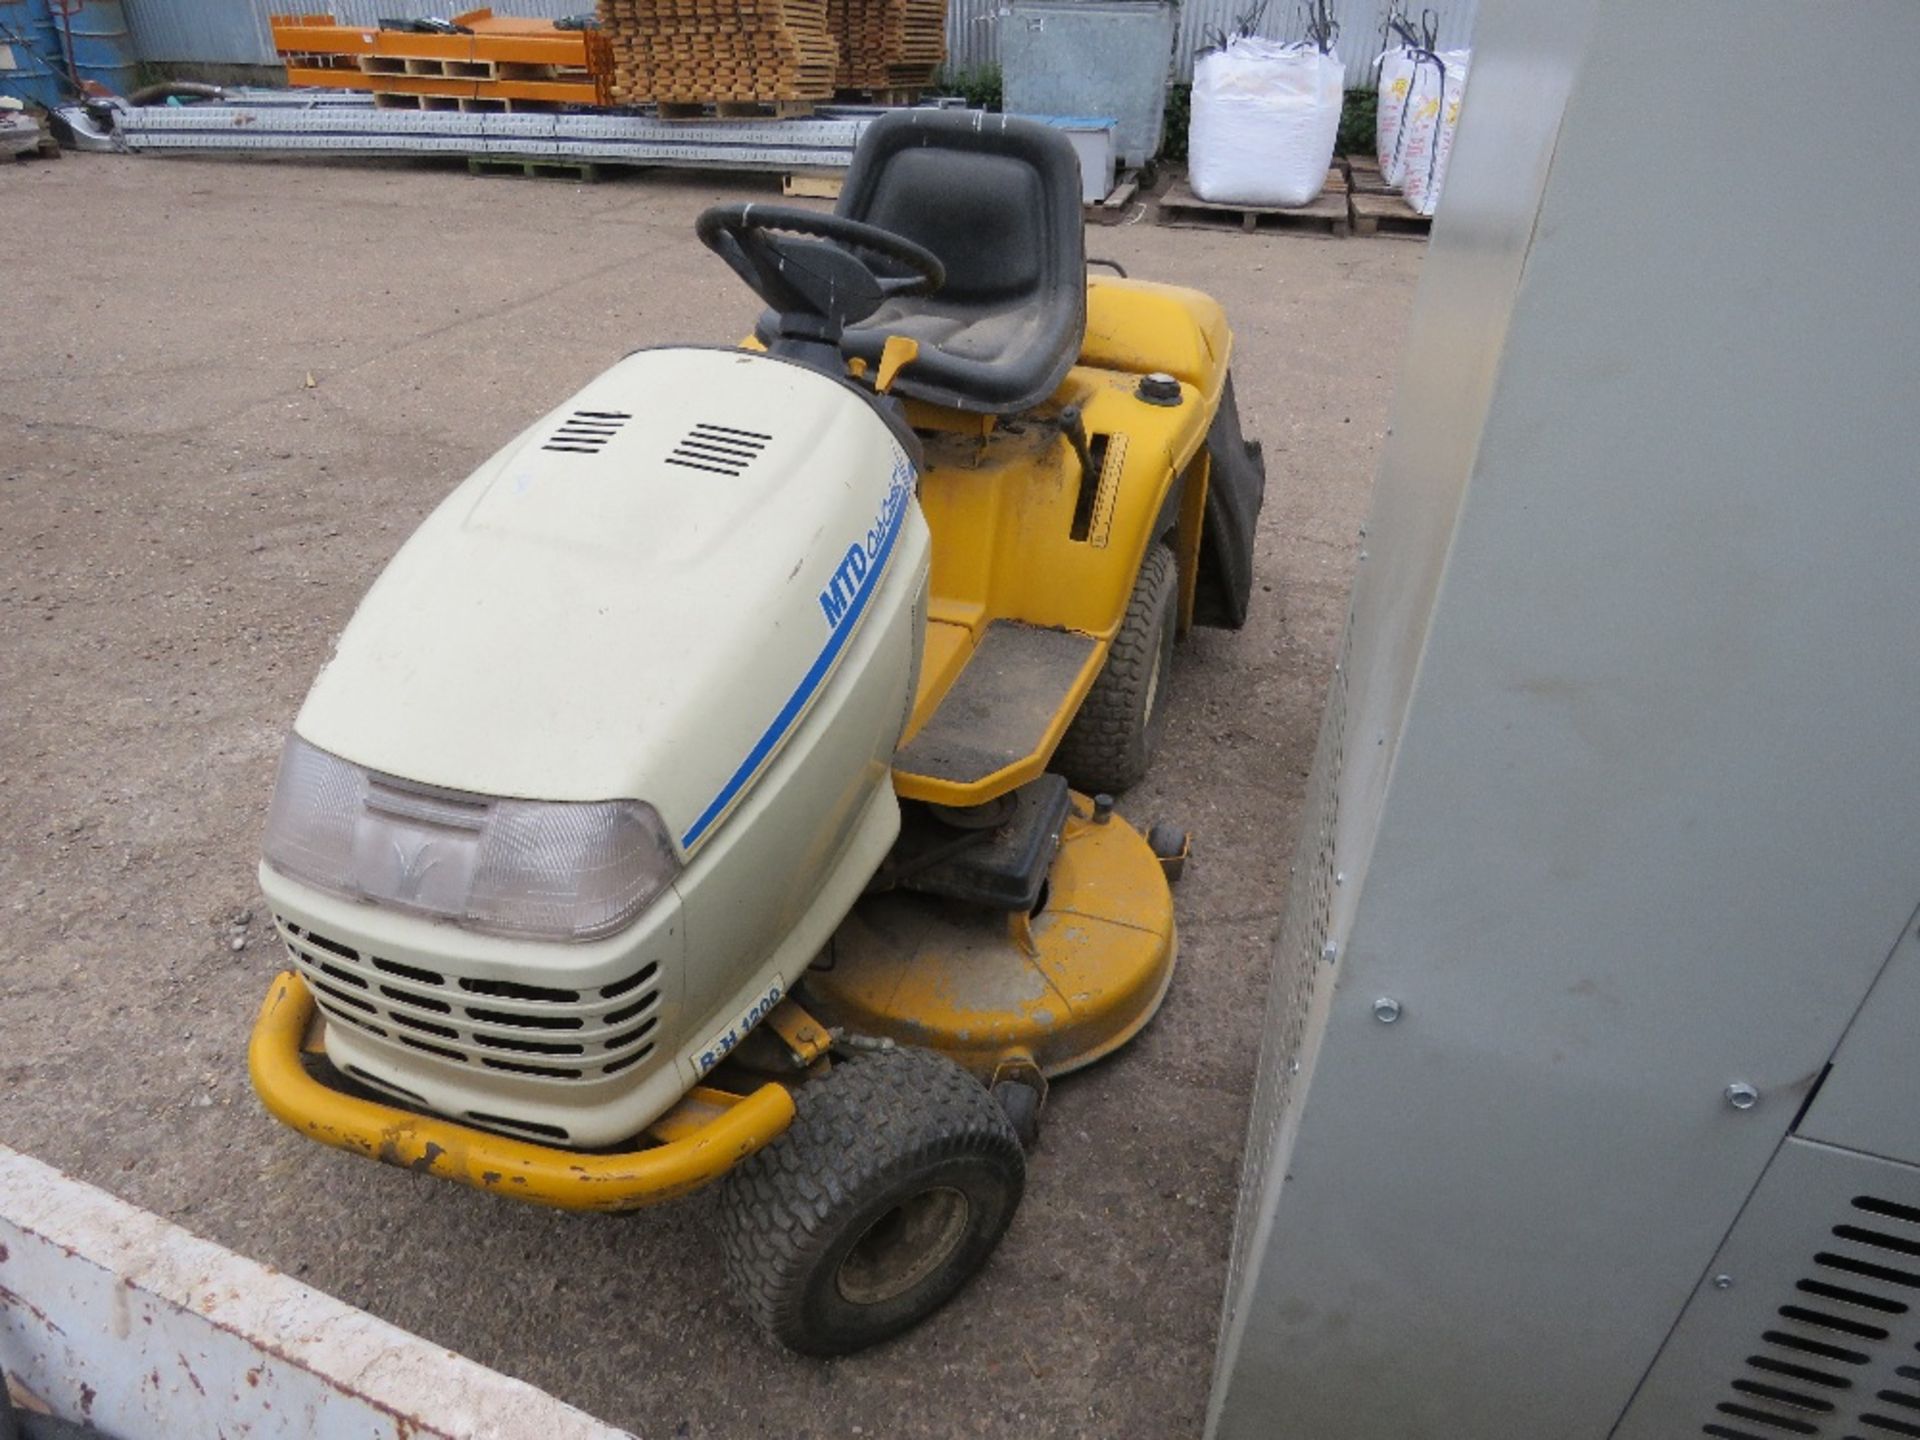 MTD CUB CADET PROFESSIONAL RIDE ON MOWER, PETROL ENGINED. BEEN IN STORAGE FOR SOME YEARS. NON RUNNER - Image 4 of 5